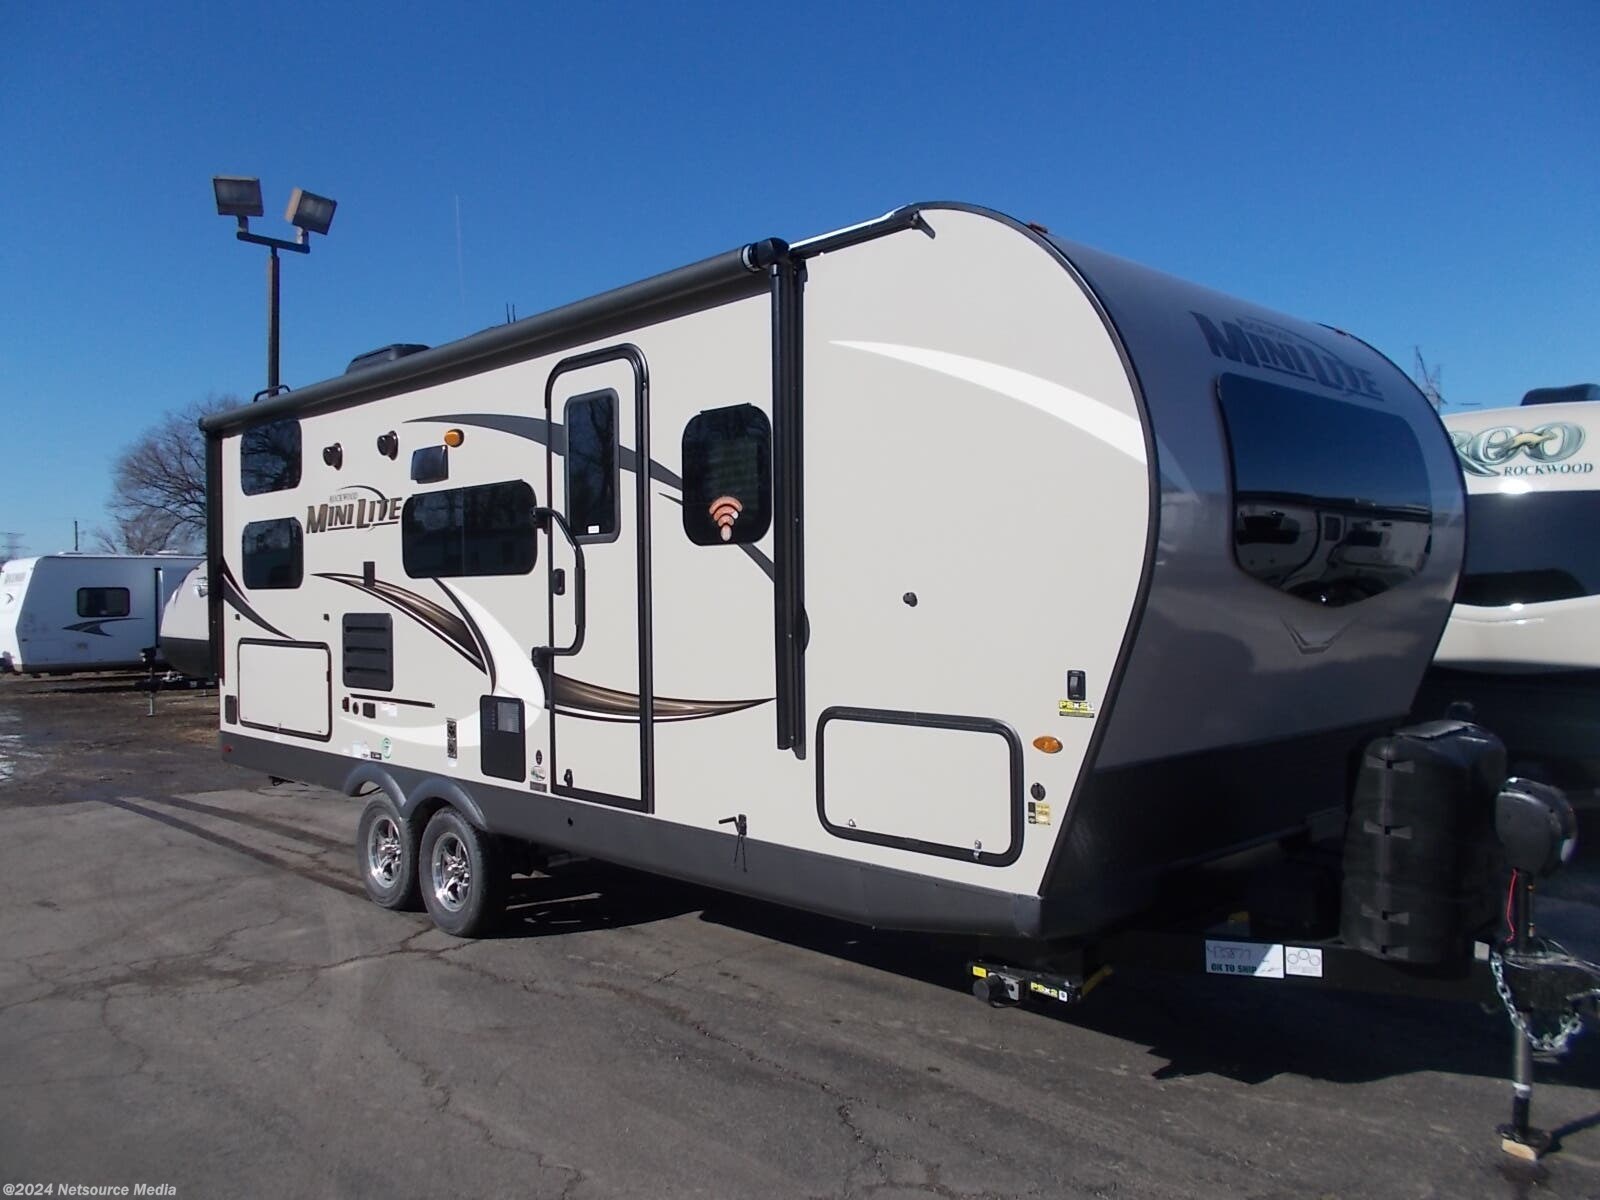 Flagstaff Travel Trailers Folding Campers A Frame Camper Camping Camper Camping Trailer